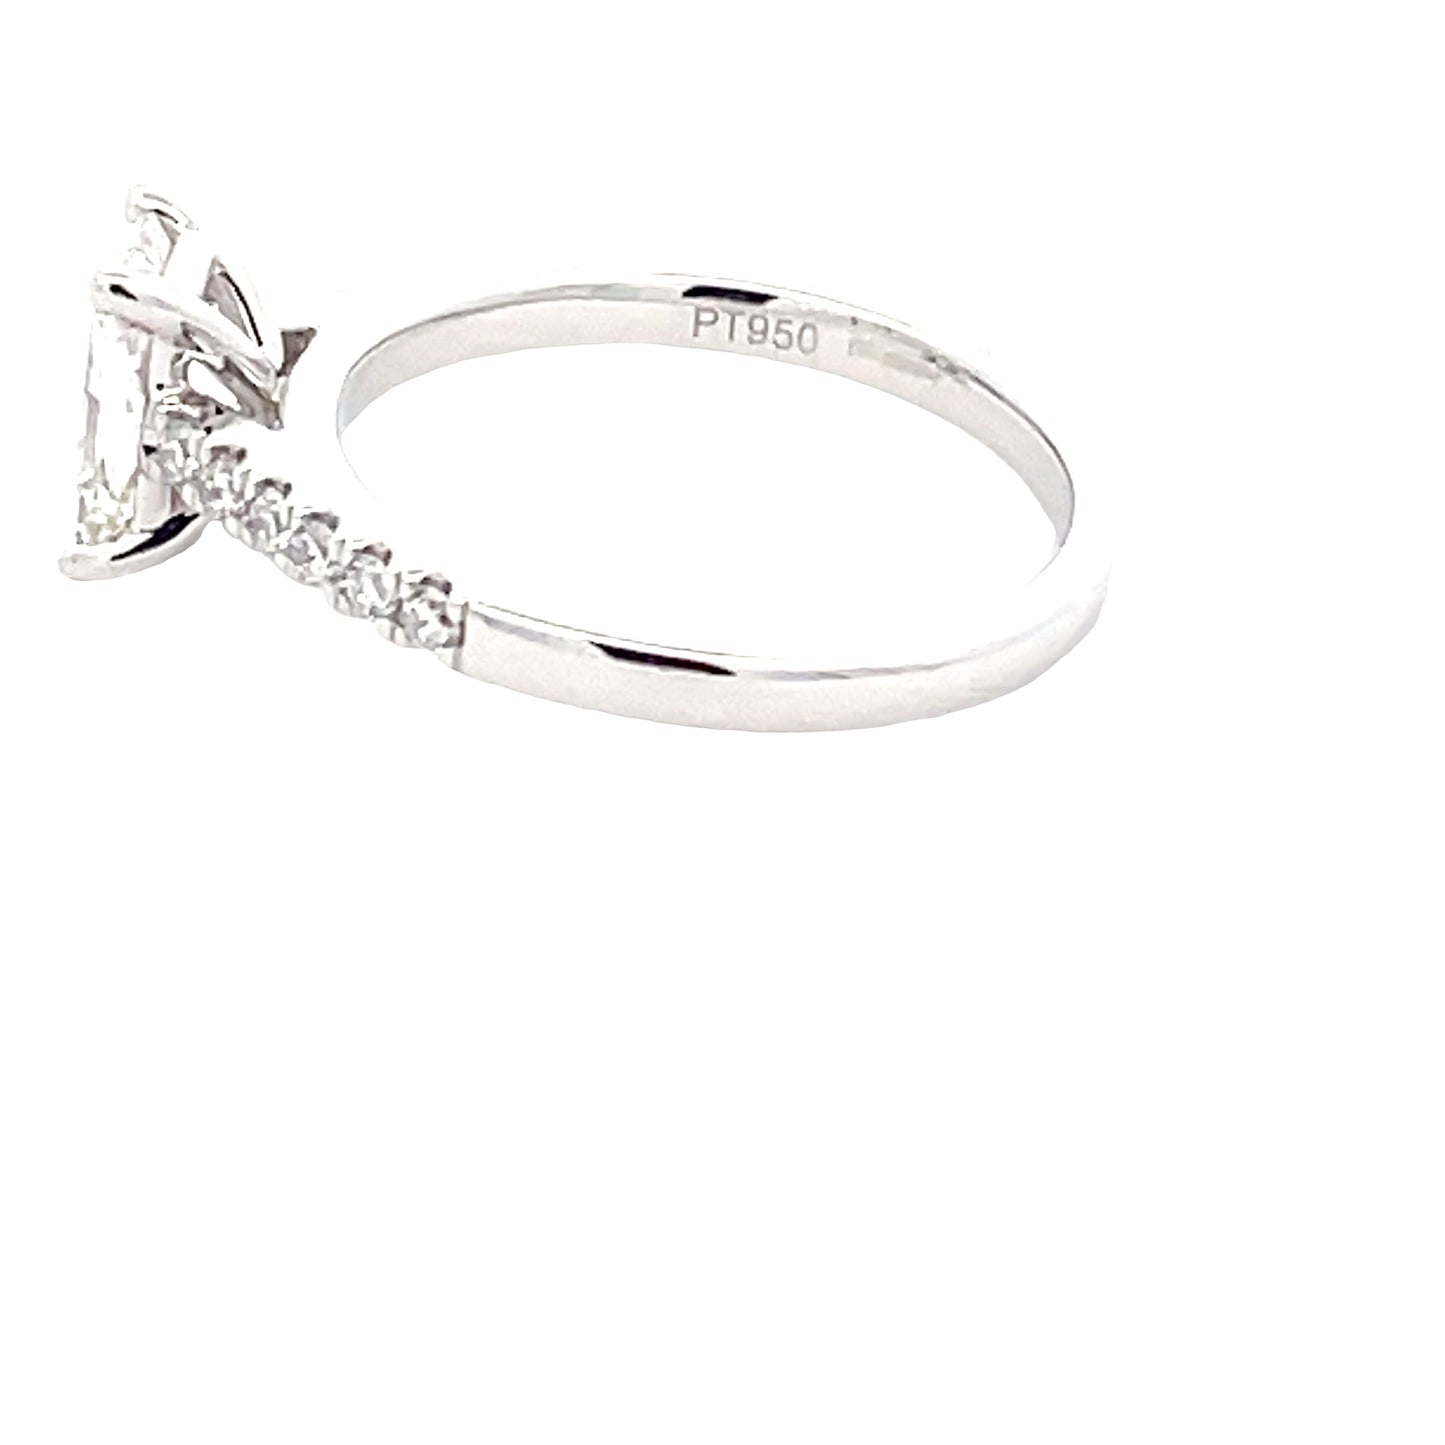 Radiant Cut Diamond Solitaire Ring with diamond set shoulders - 1.28cts  Gardiner Brothers   